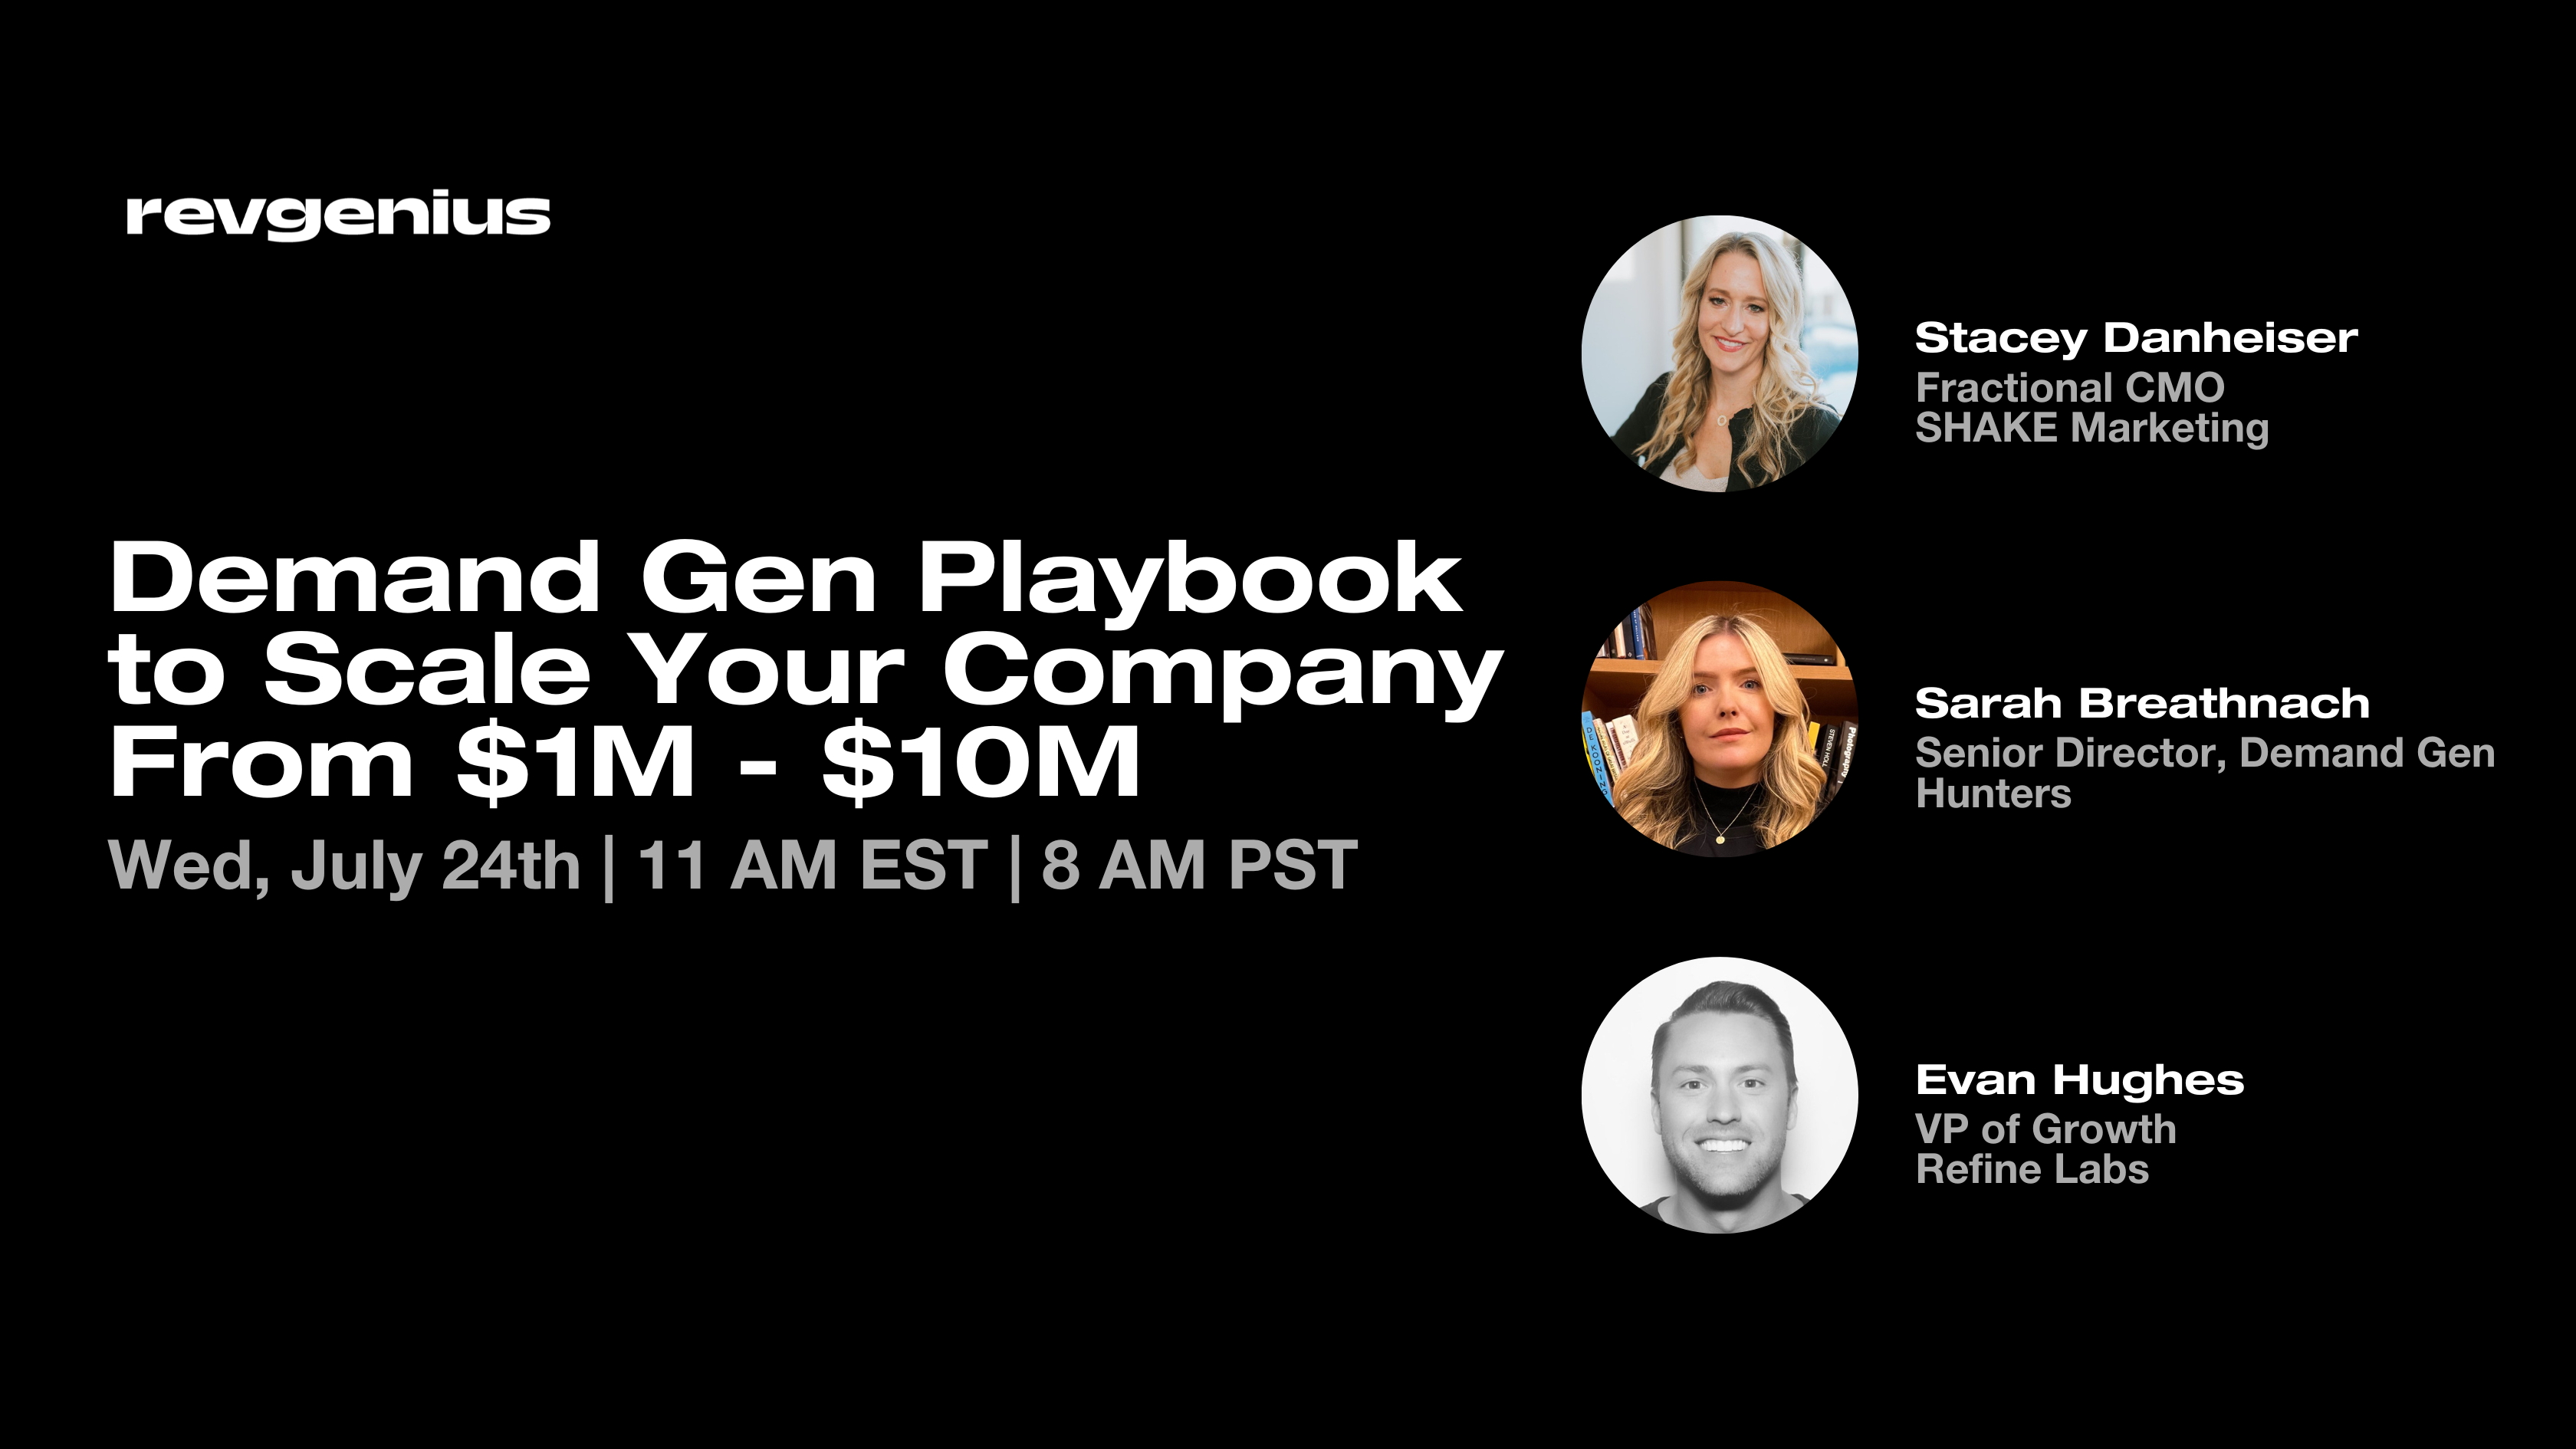 Demand Gen Playbook to Scale Your Company From $1M - $10M_webinar